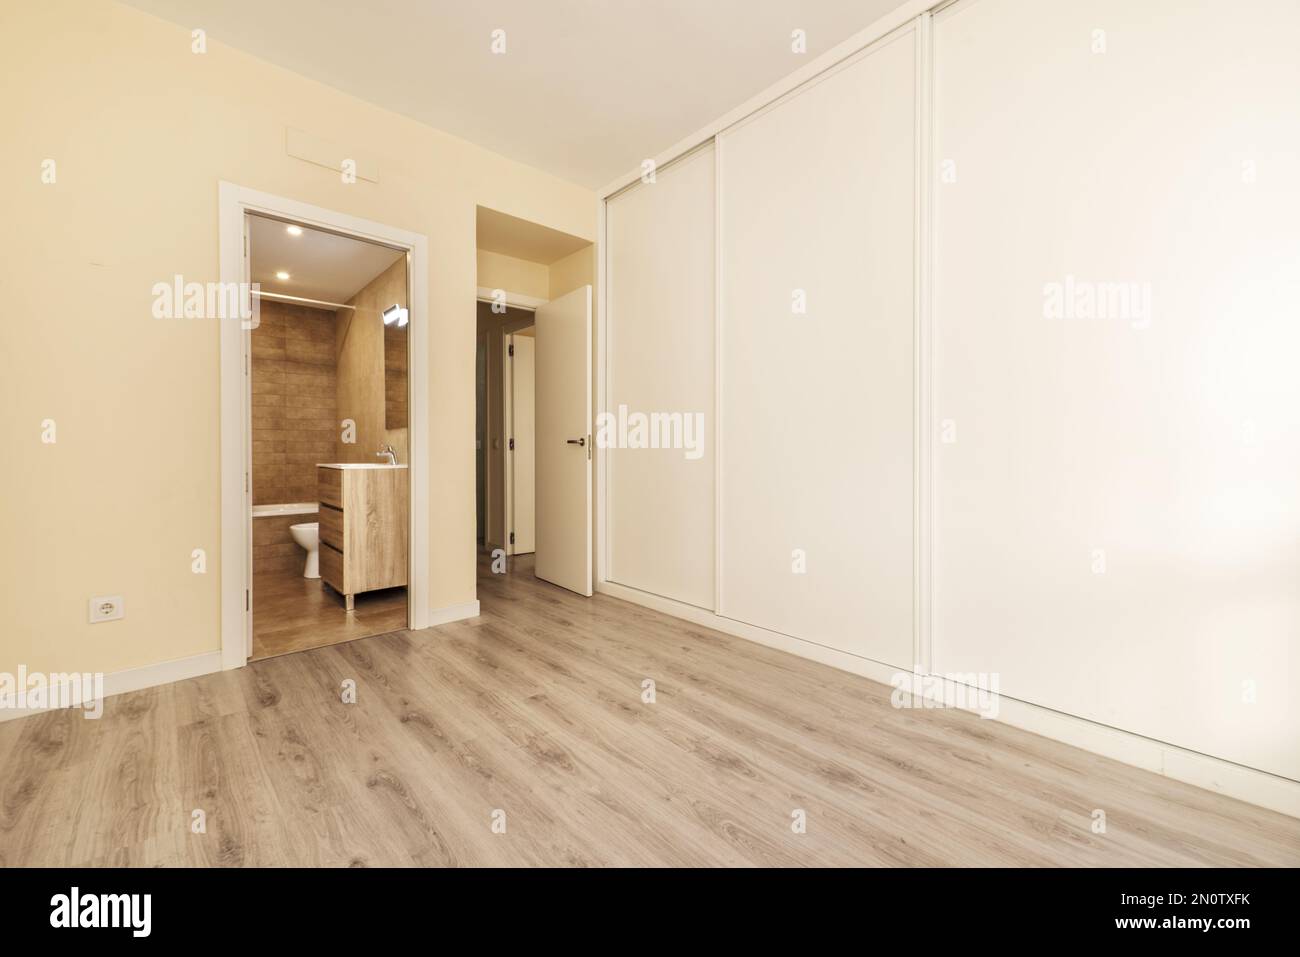 Empty bedroom with en-suite bathroom and a wall-to-wall white wooden sliding-door closet Stock Photo